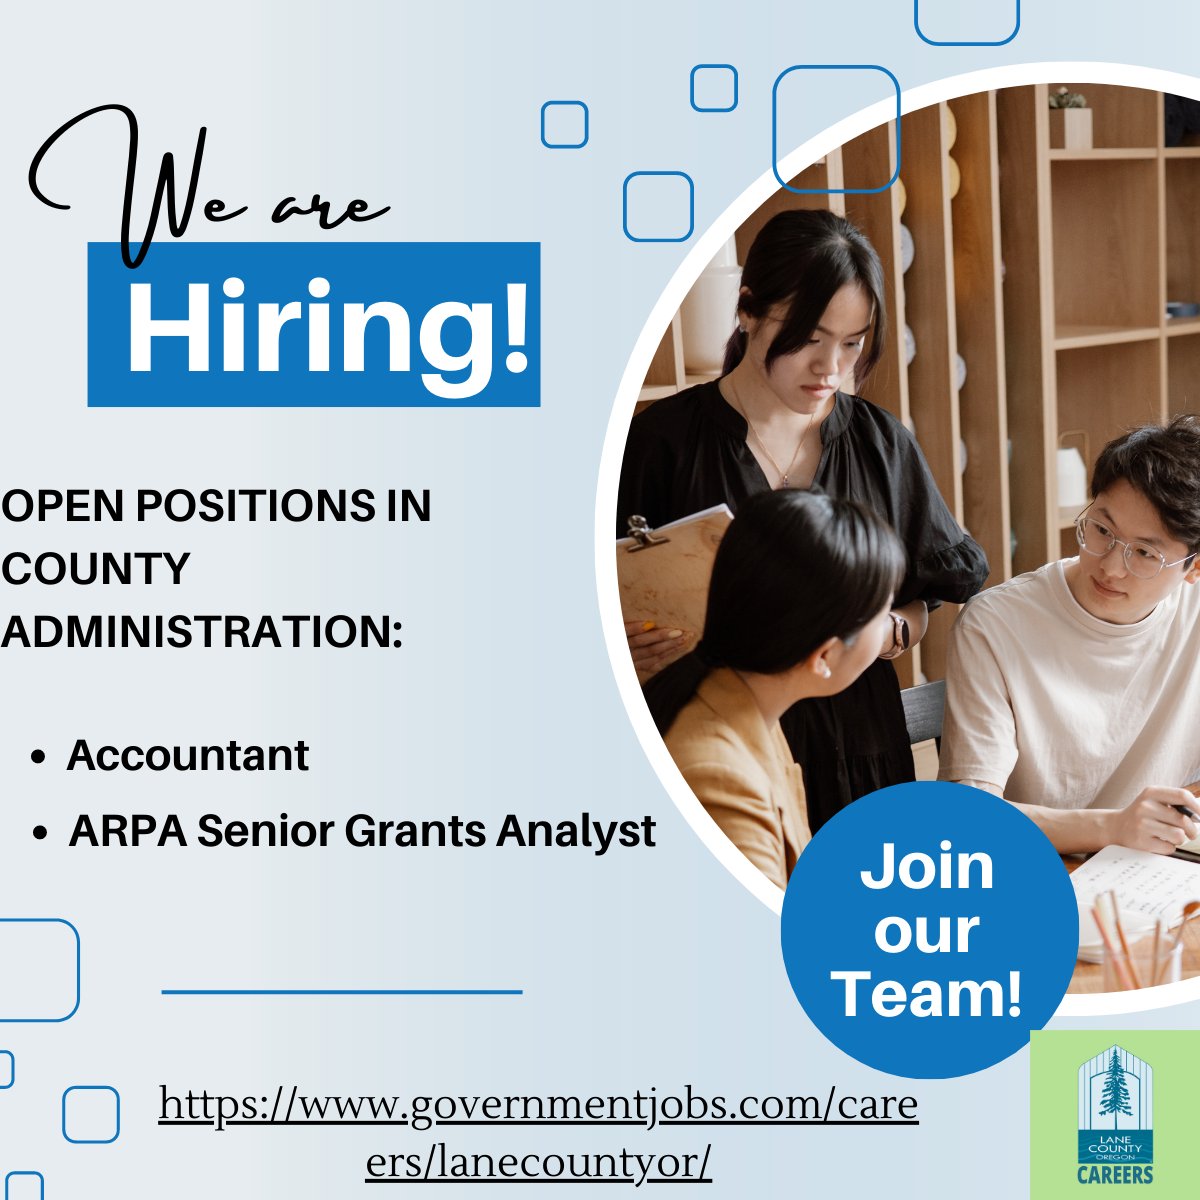 Check out these openings in County Administration!
#GovJobsRue #hiring #JobSeekers #LaneCountyGov #careers #GovJobs #finance #AccountingJobs #GrantAnalyst #GrantWriting